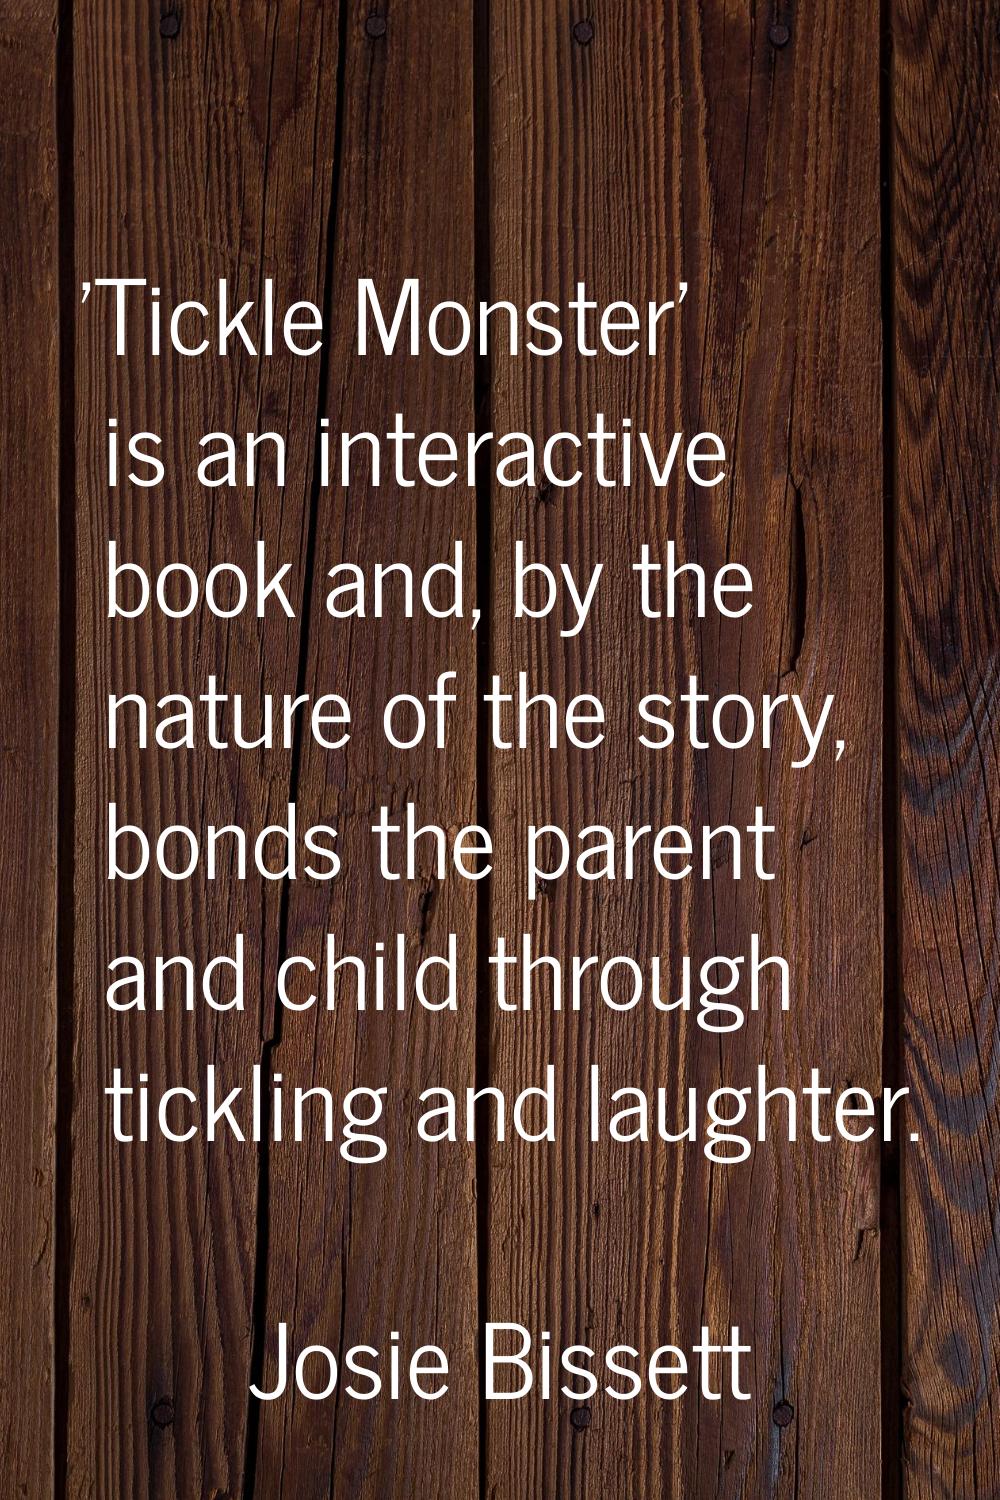 'Tickle Monster' is an interactive book and, by the nature of the story, bonds the parent and child